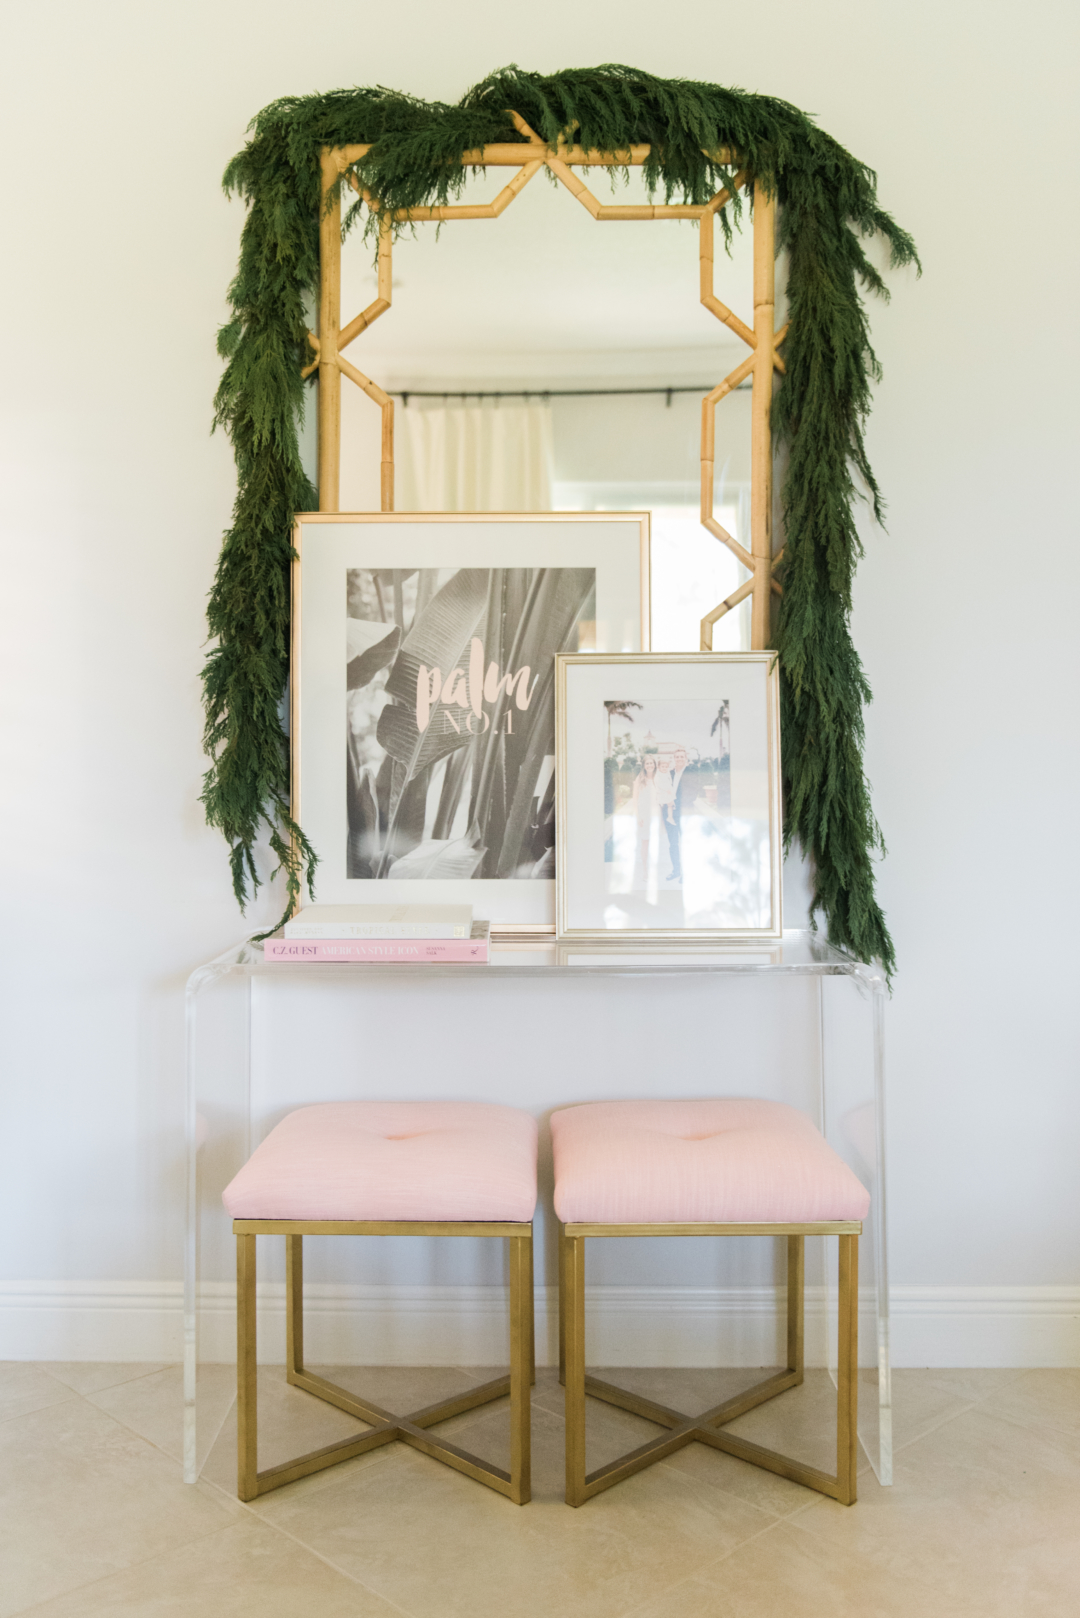 Sister style: How to style a console two ways with Palm Beach Lately and Framebridge